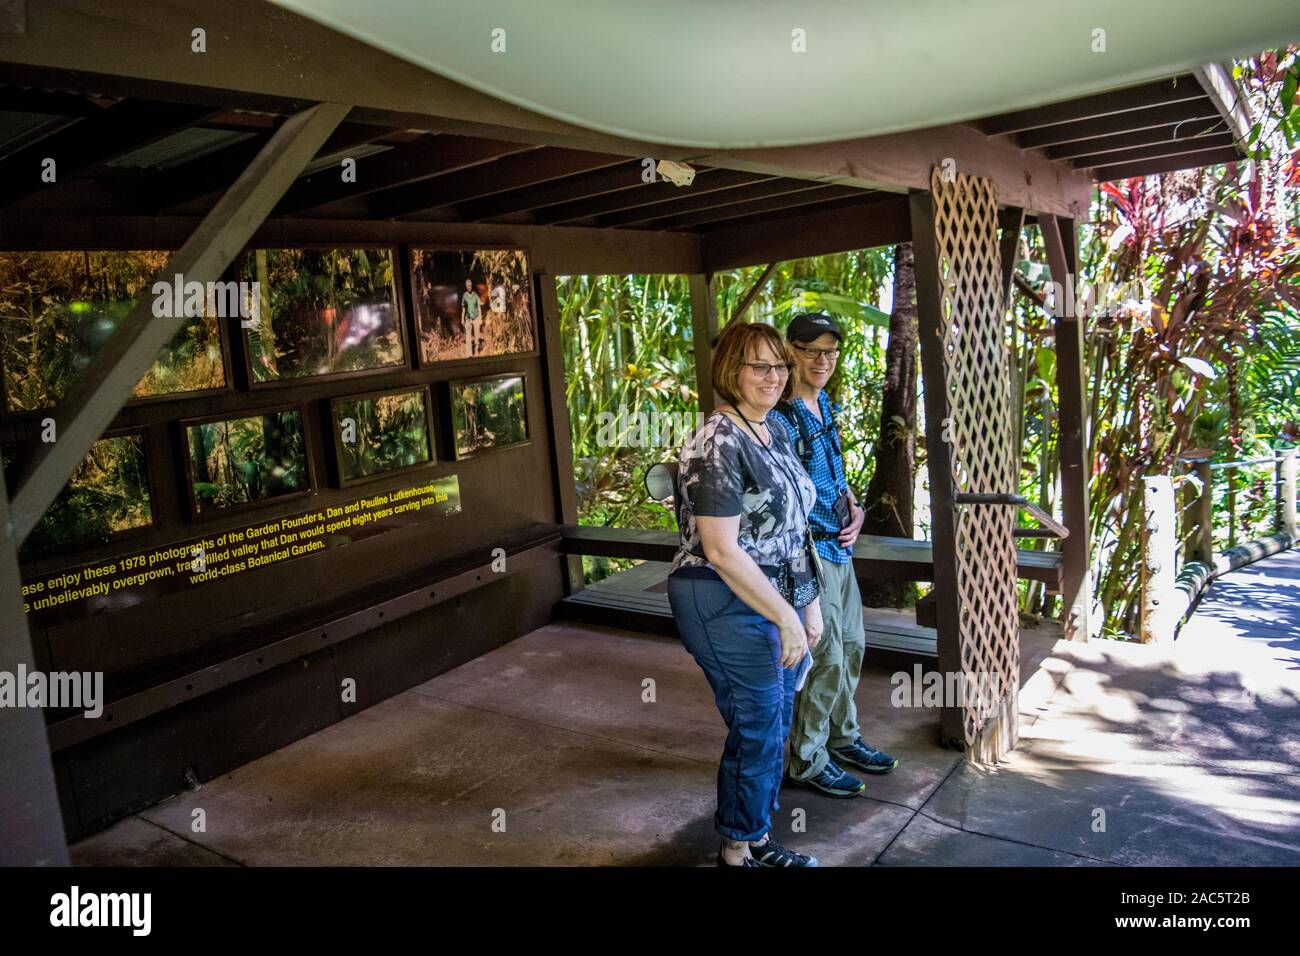 Tourists under the shelter of a covered photo exhibit at the Hawaii Tropical Botanical Garden, Papa'ikou, Big Island of Hawaiʻi. Stock Photo